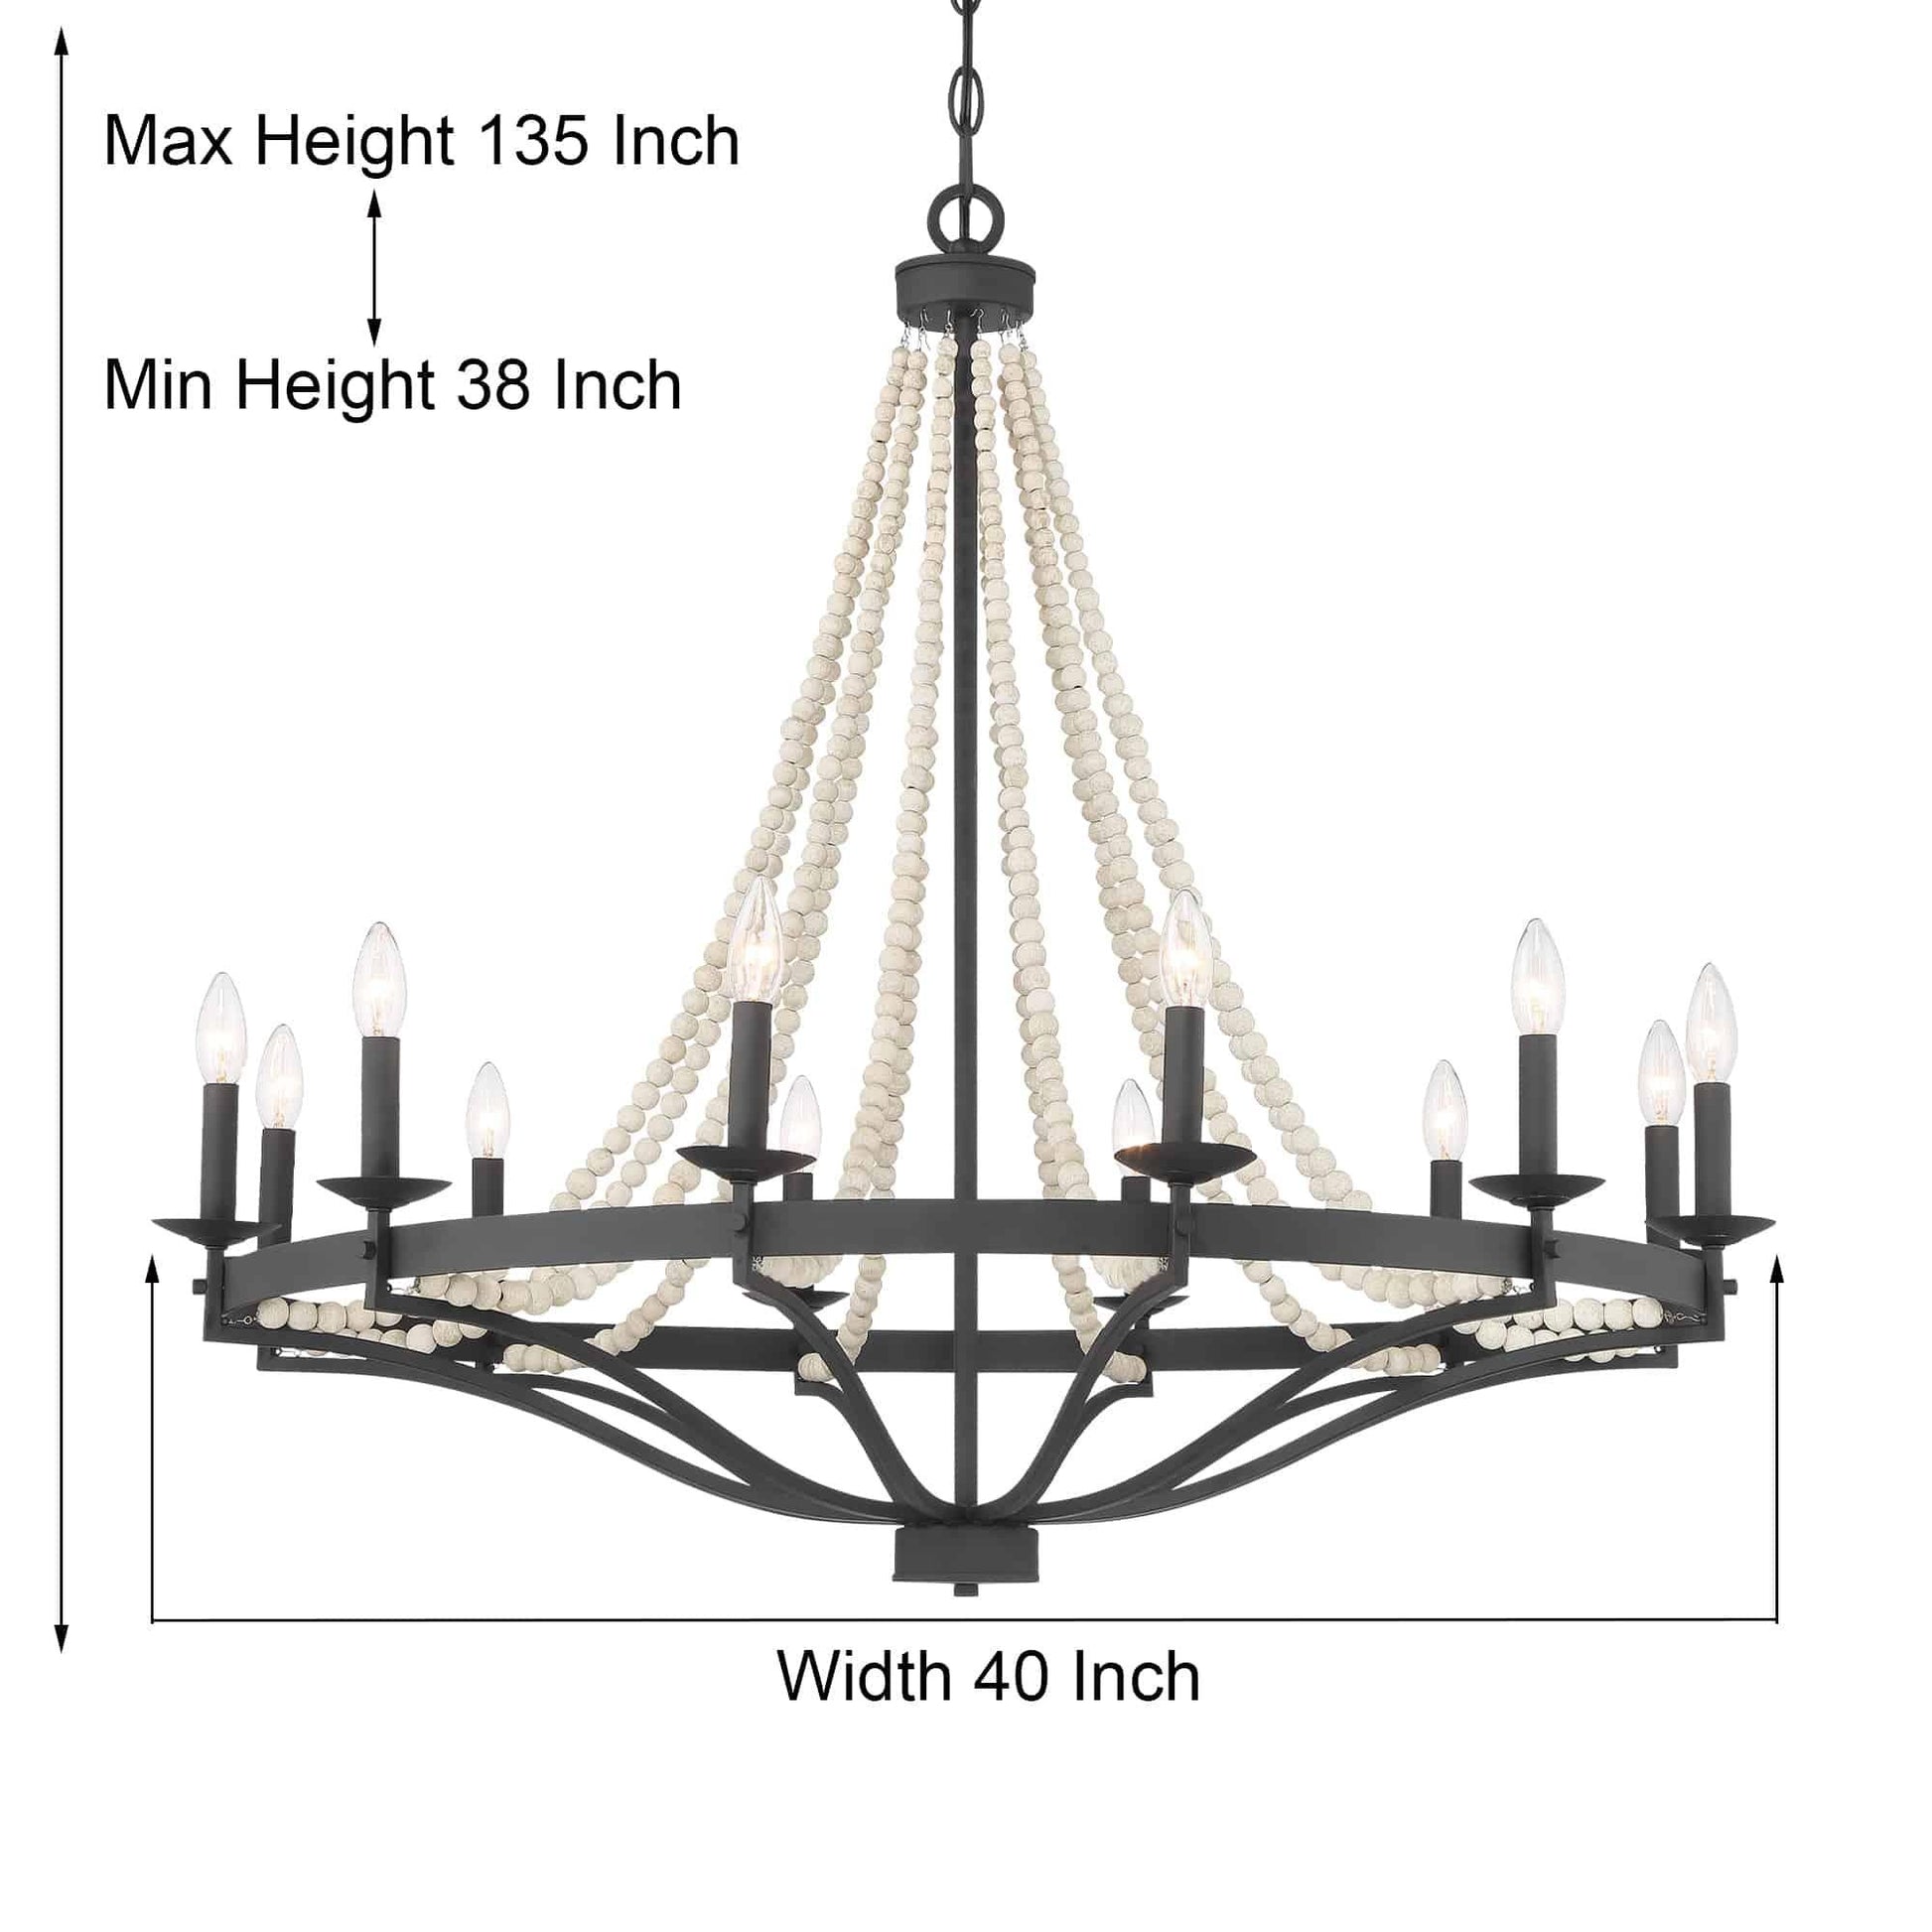 12 light candle style wagon wheel chandelier with beaded accents (18) by ACROMA